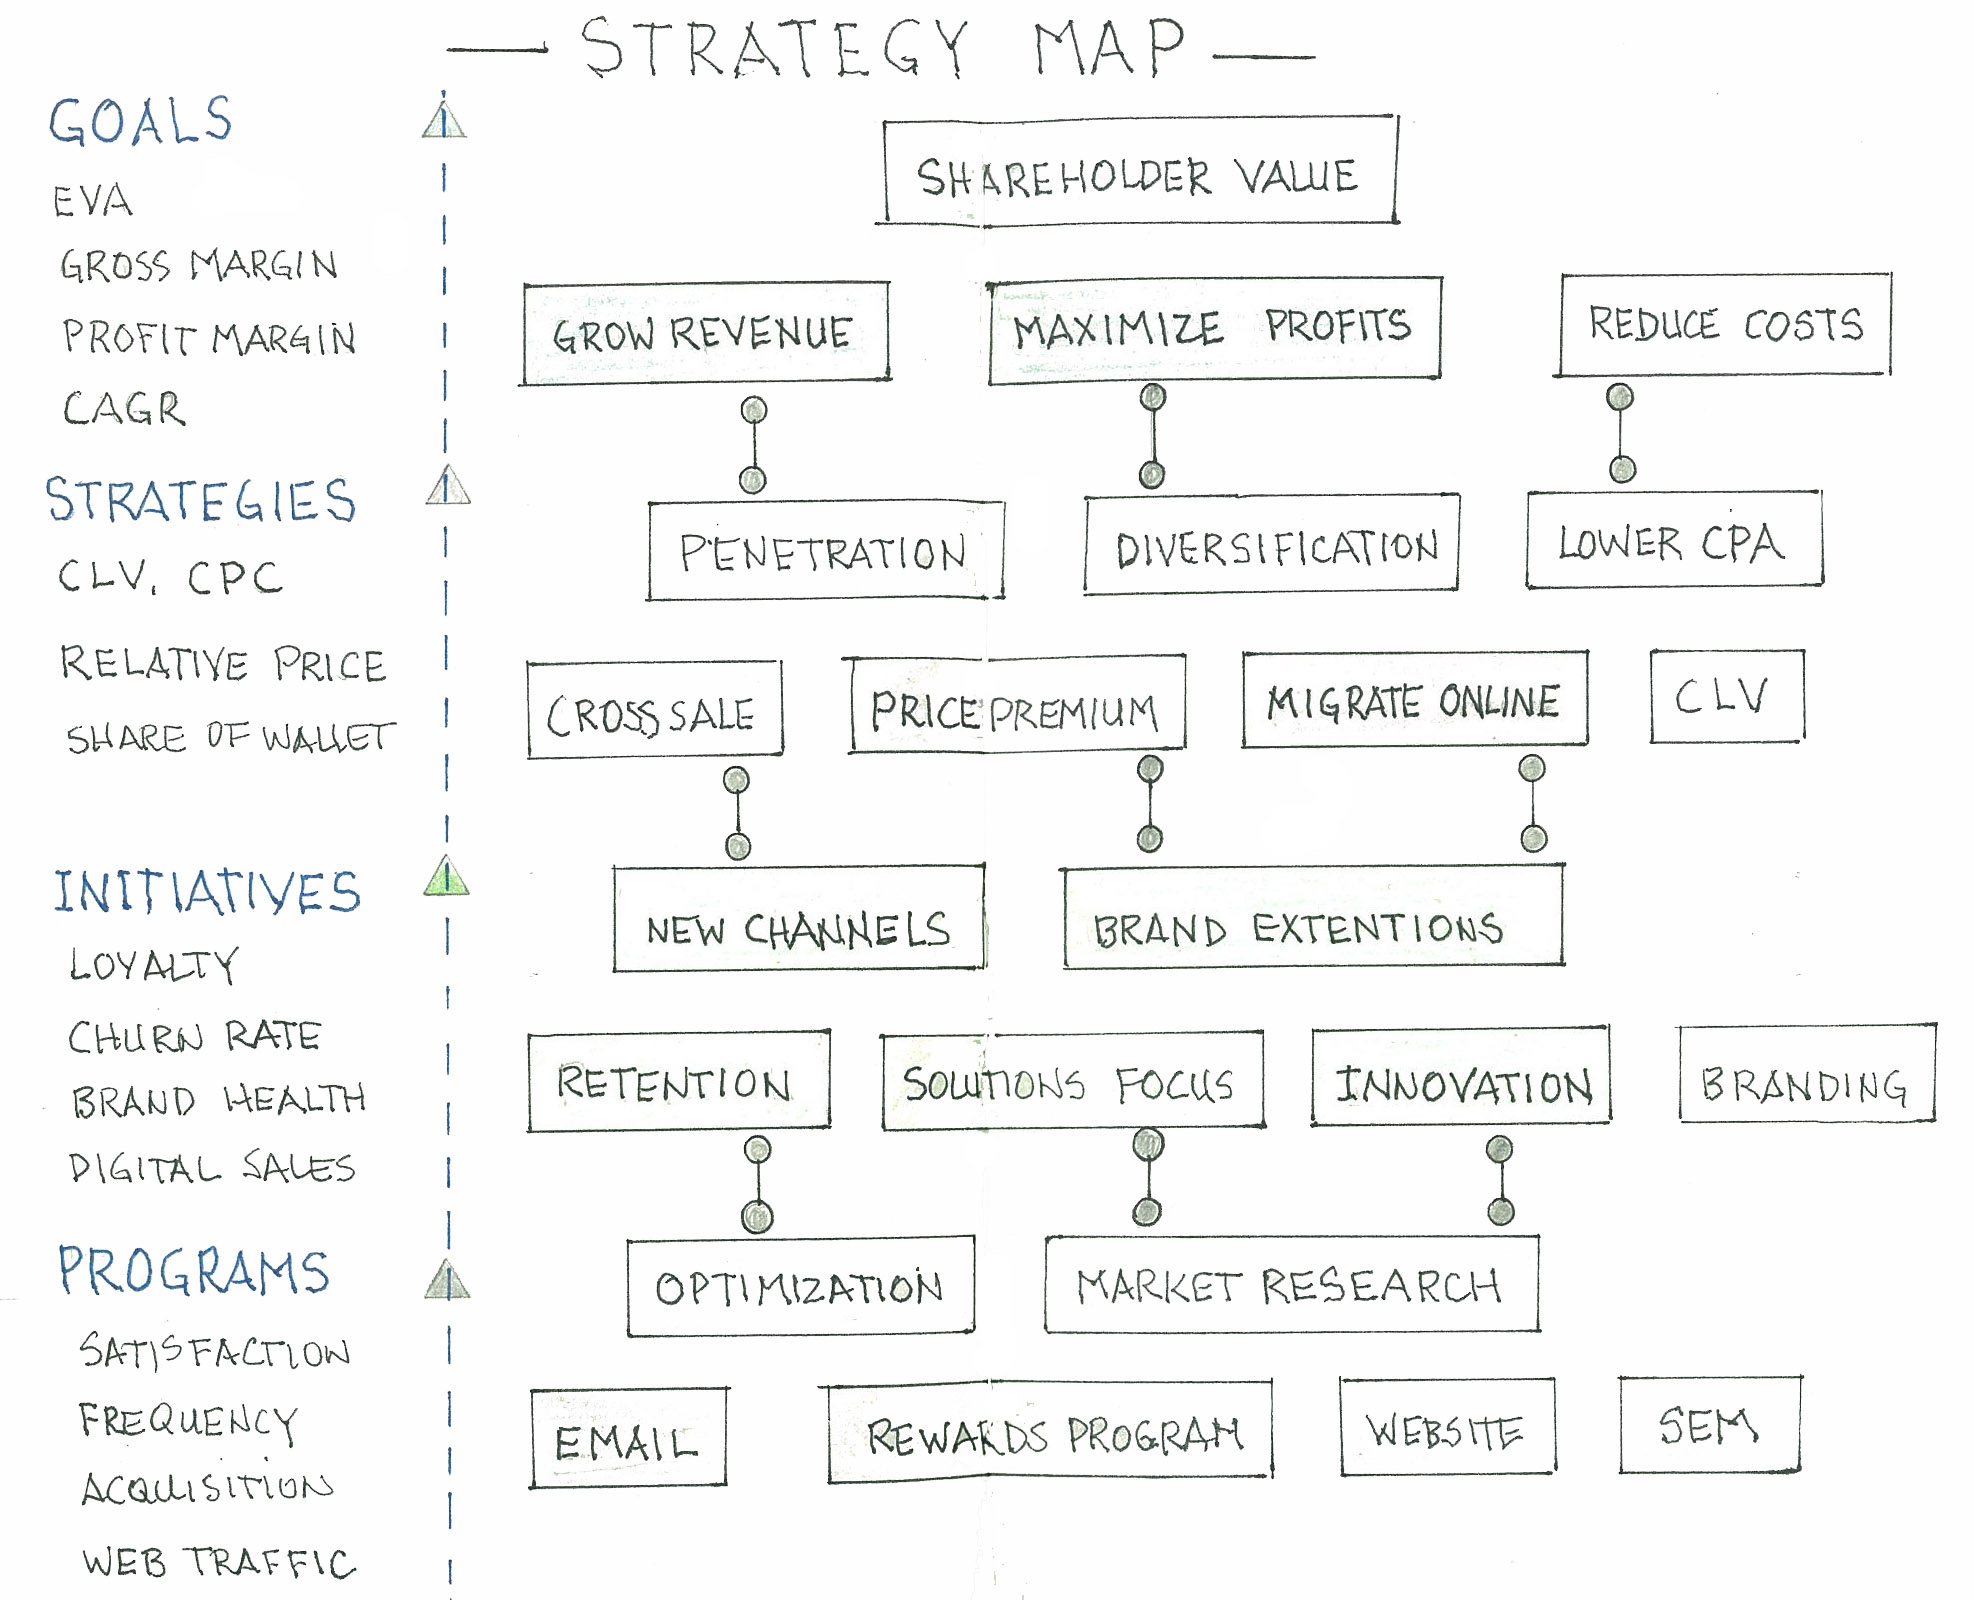 Notebook Thoughts – Mapping Marketing ROI